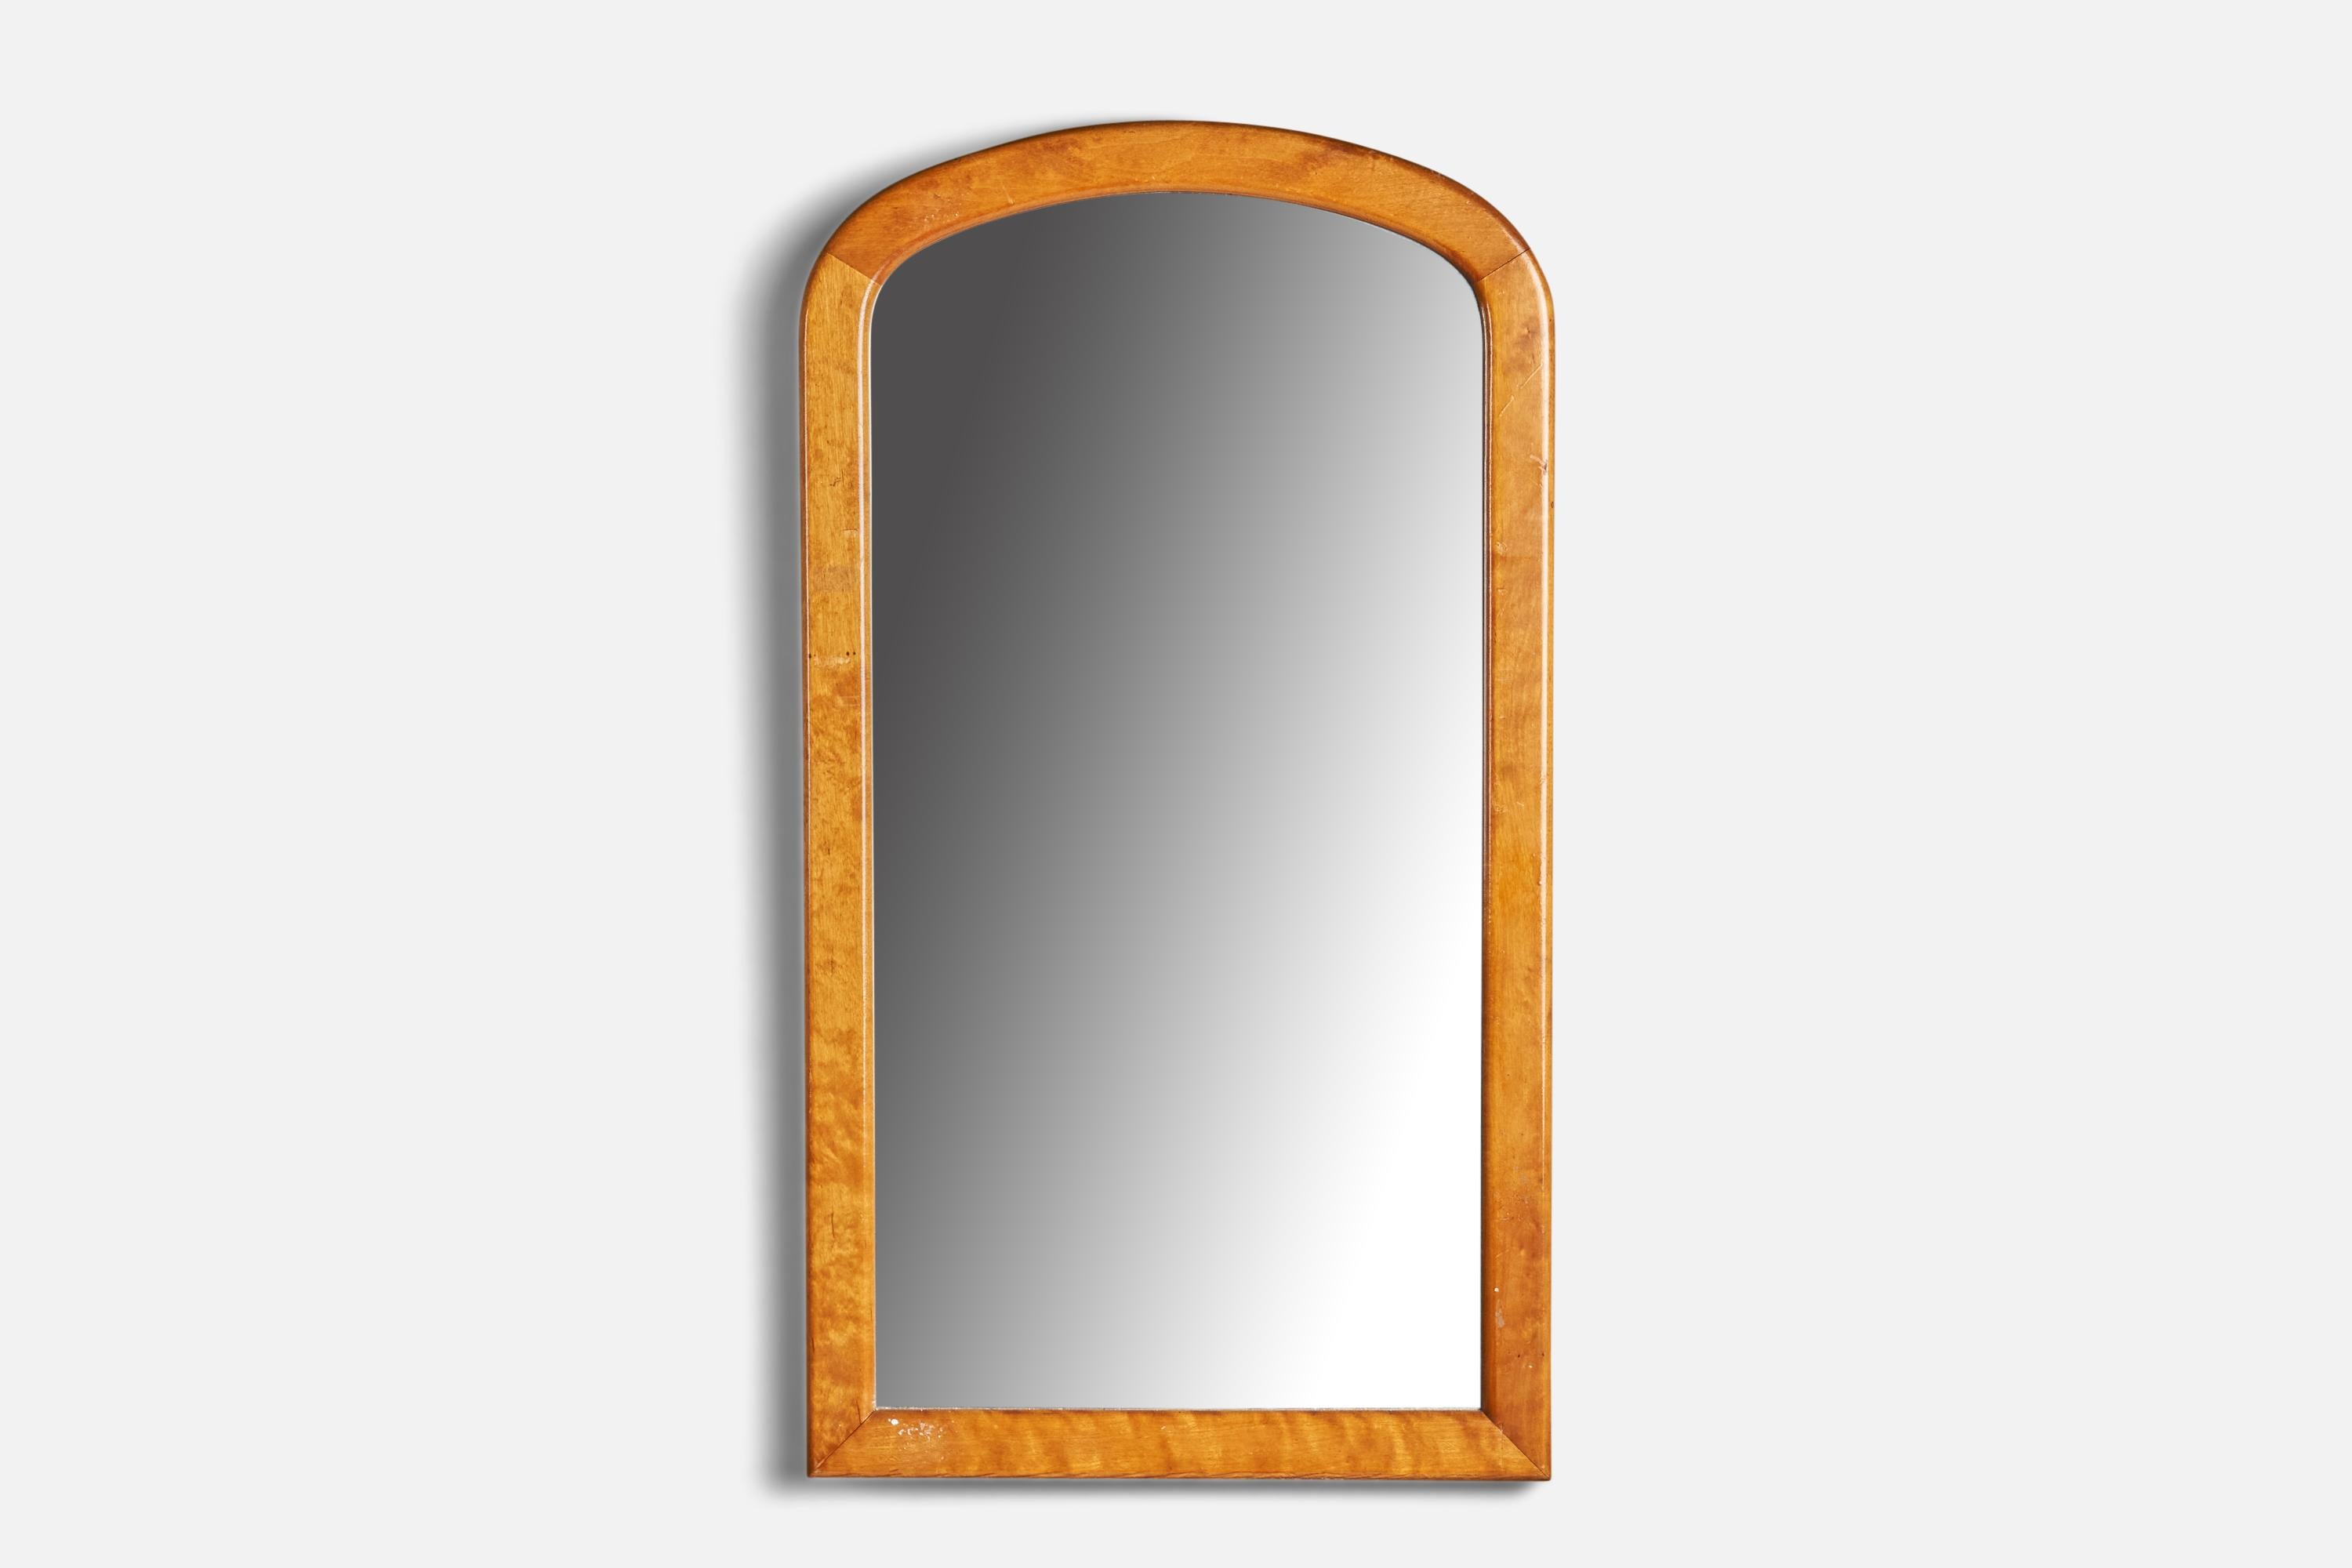 A birch wall mirror designed and produced in Sweden, c. 1920s.